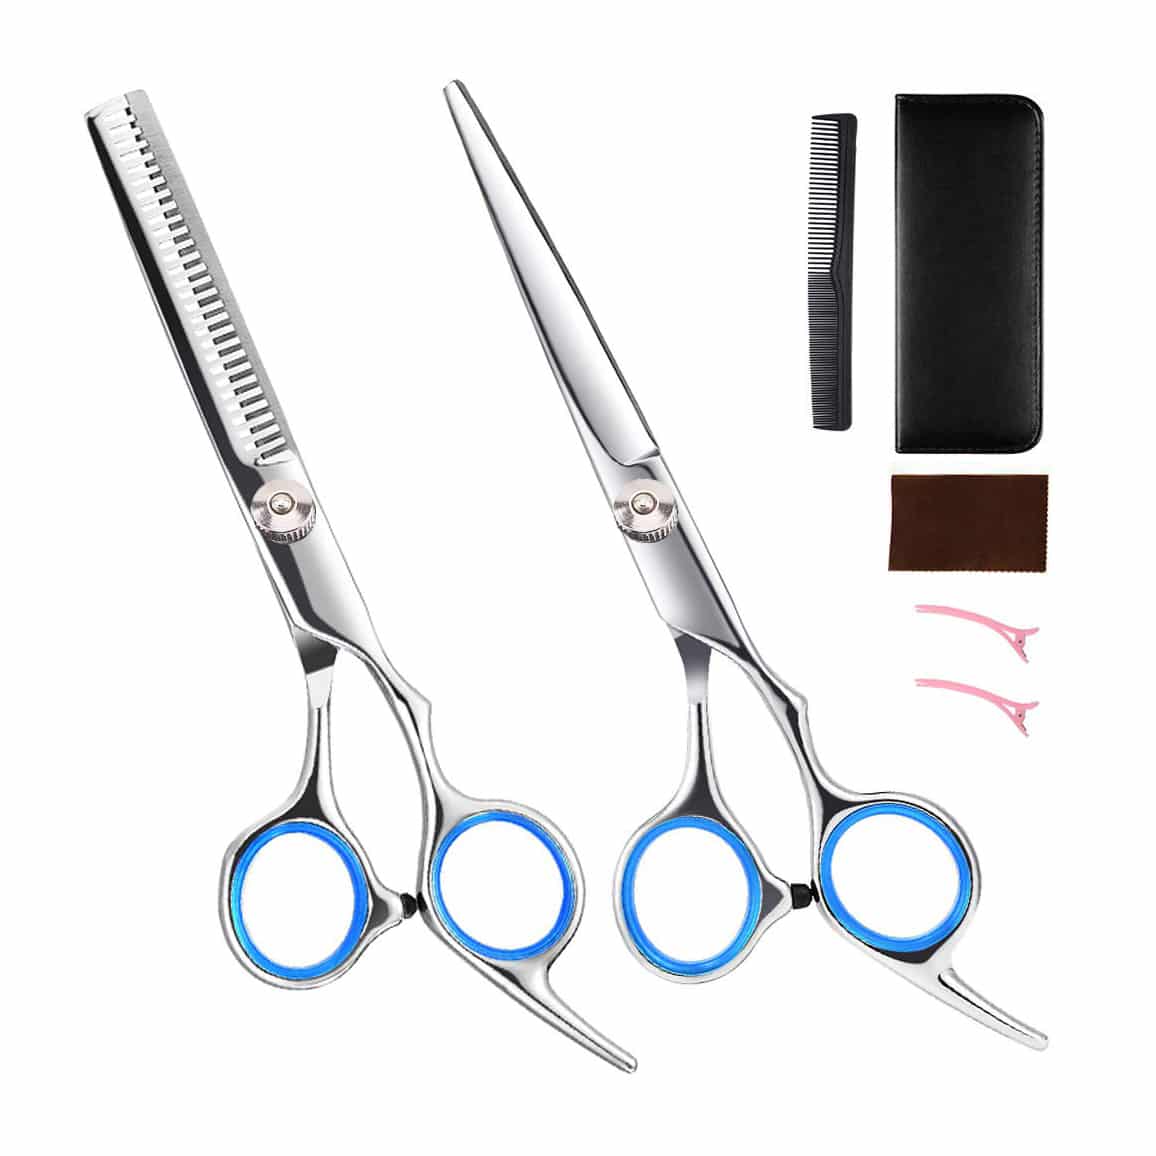 10. ZDHY Hair Cutting Professional Thinning Barber Shear 